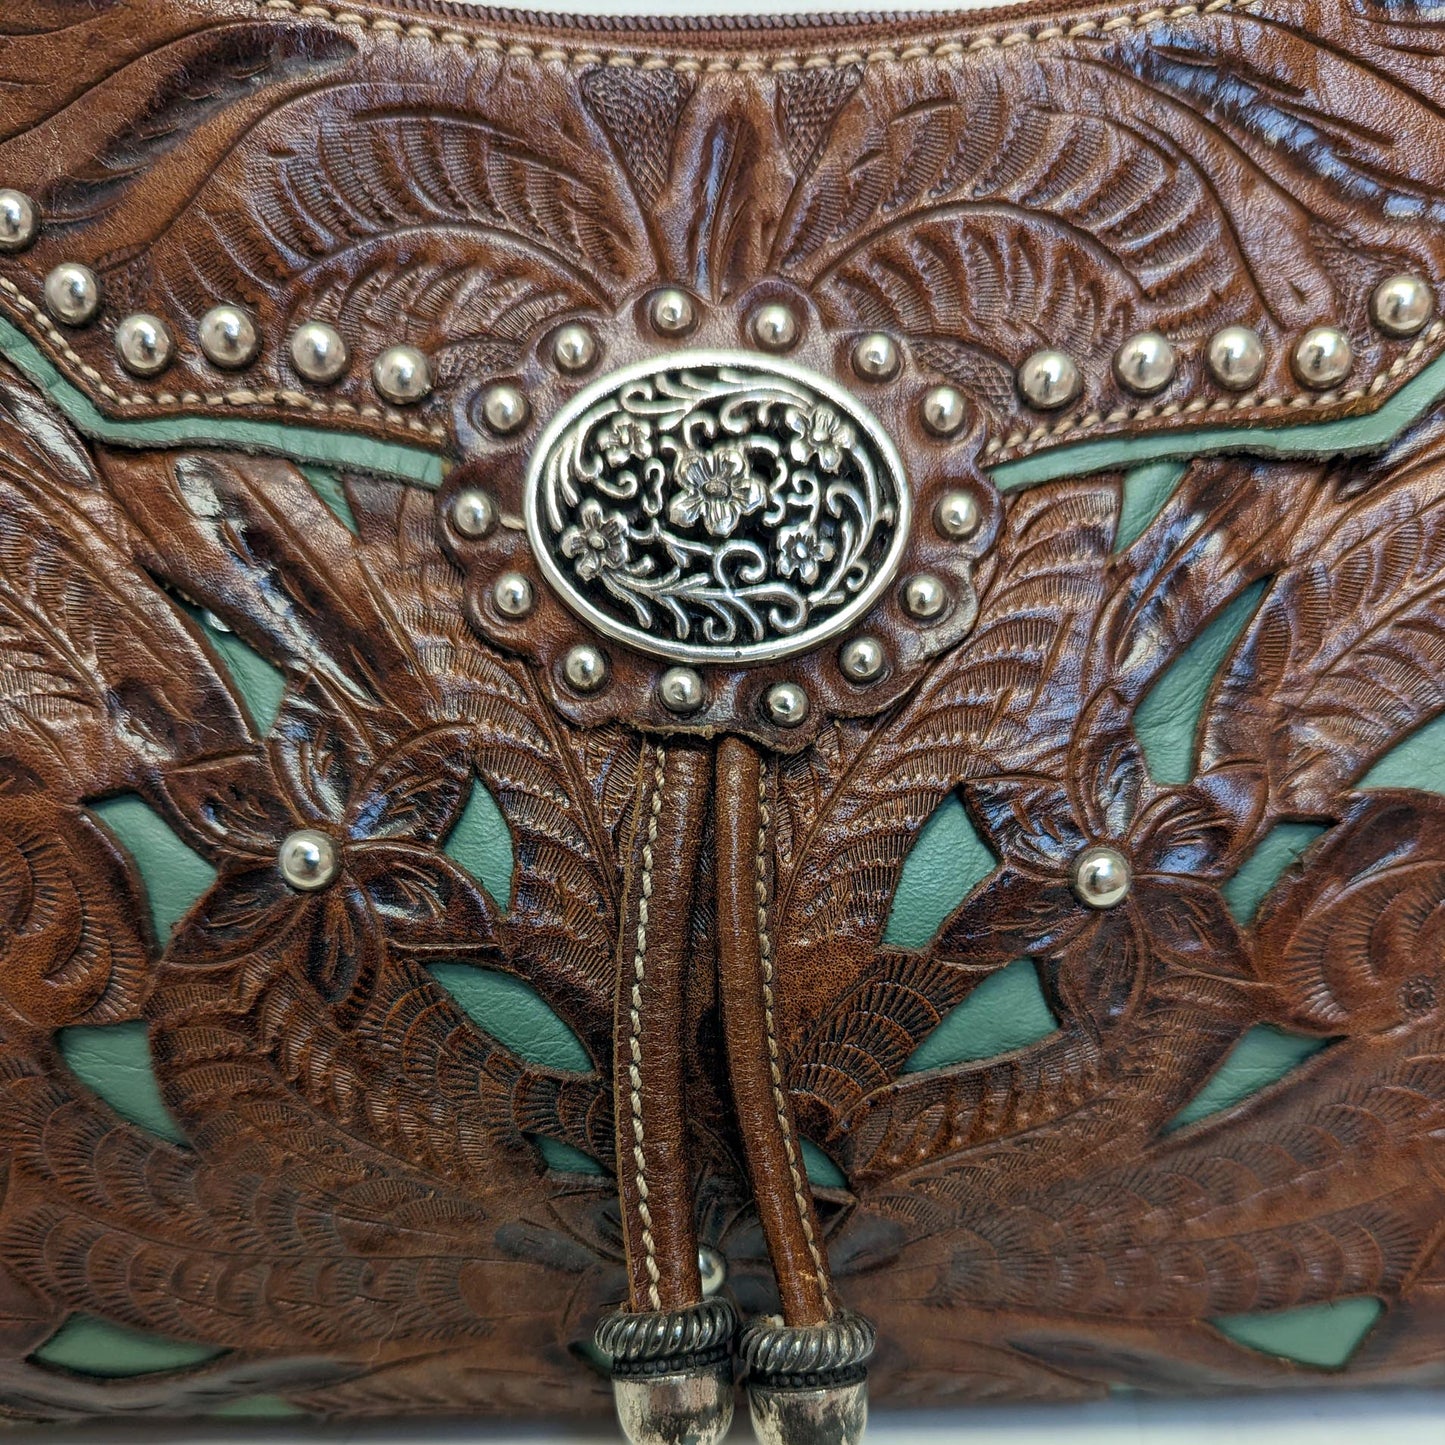 American West Lady Lace Shoulder Bag Antique Brown / Turquoise Leather LCBT285